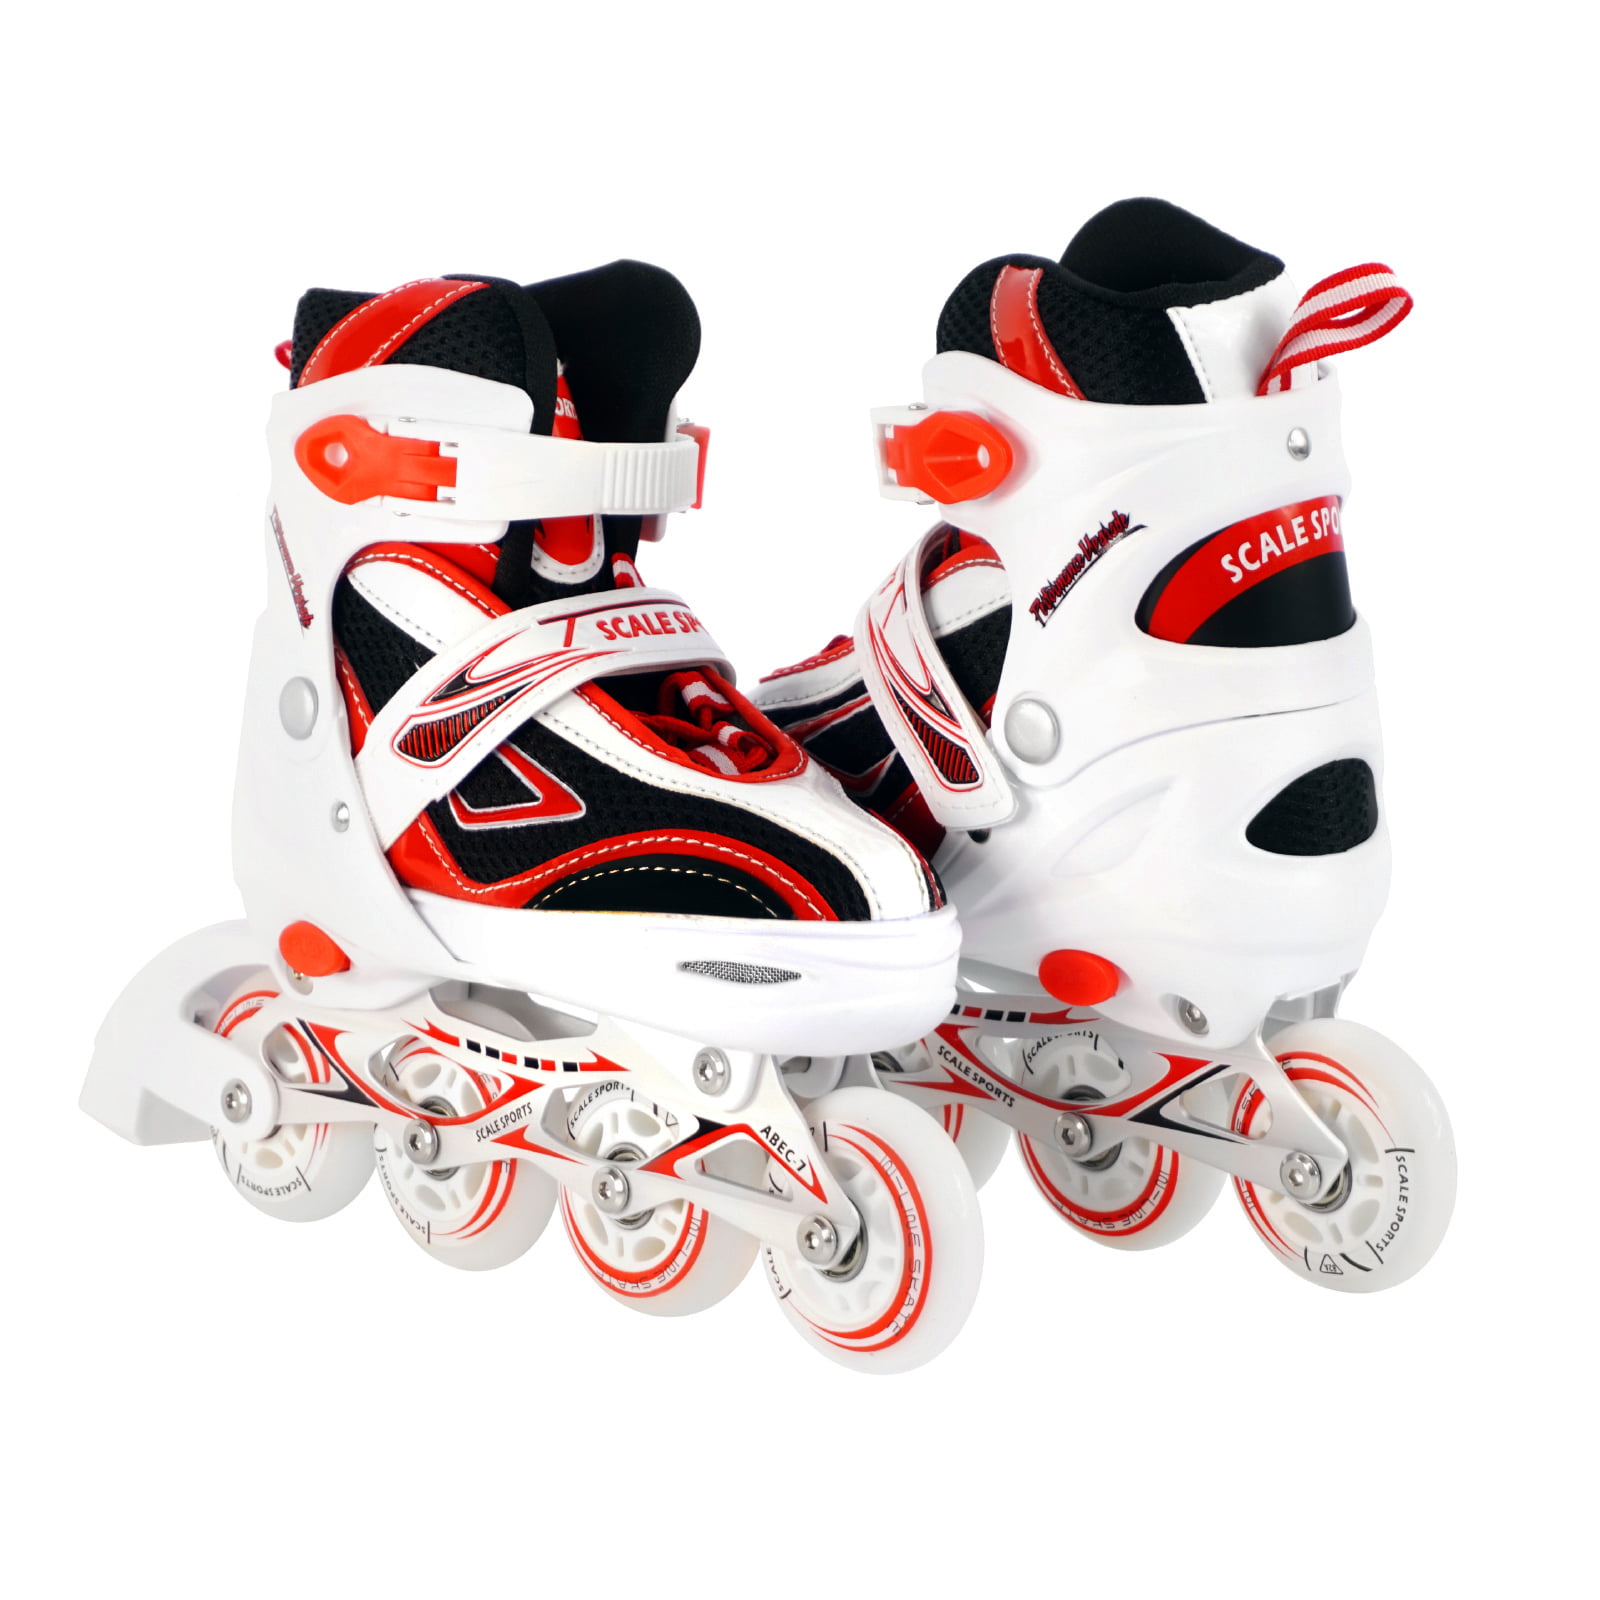 Kids/Teen Adjustable Inline Skates for Girls and Boys Durable Outdoor Roller Blades Illuminating Front Wheel Scale Sports